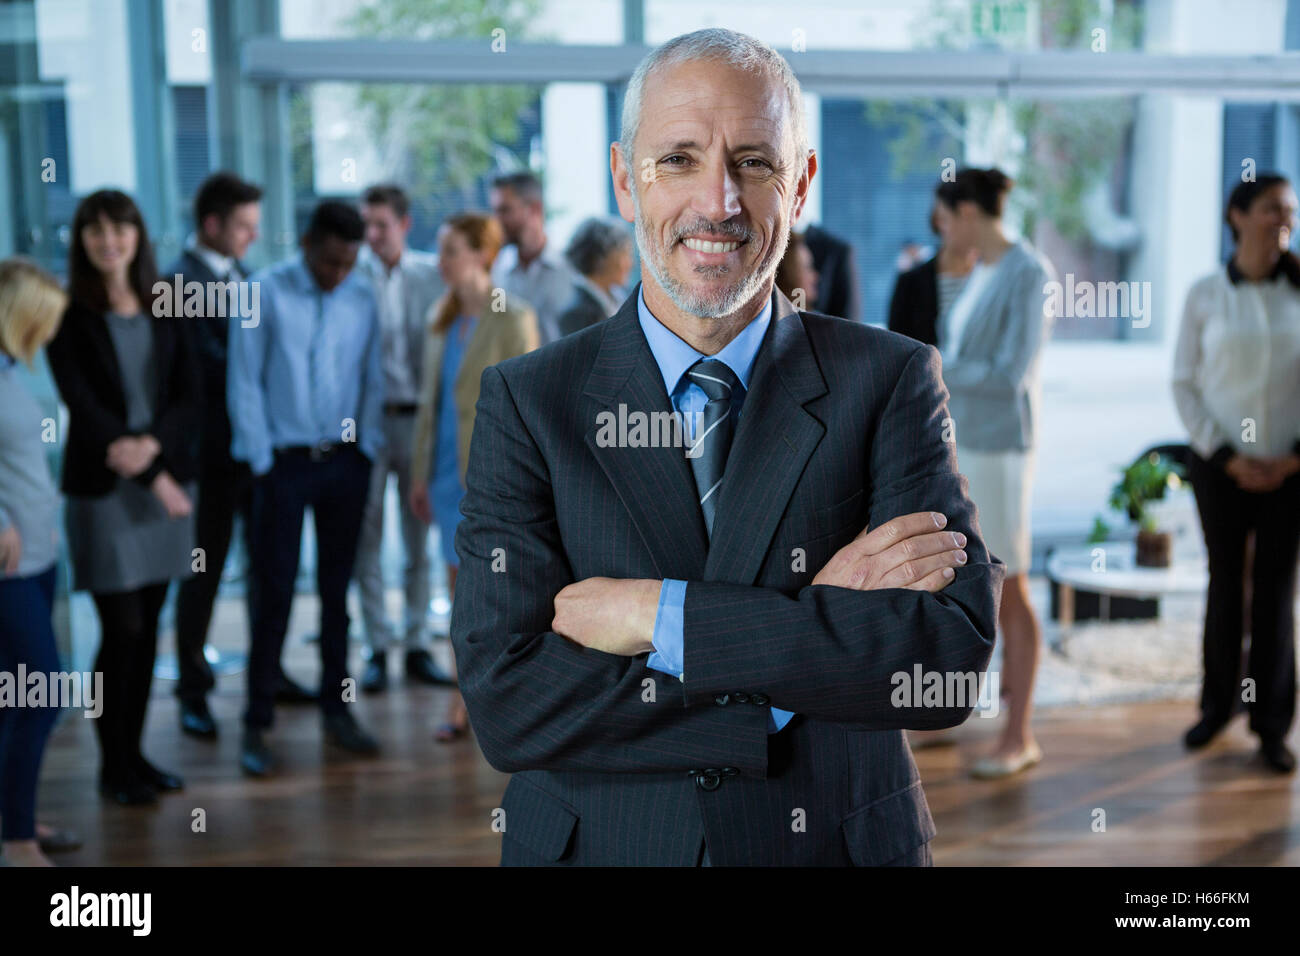 Portrait of businessman standing in office Banque D'Images